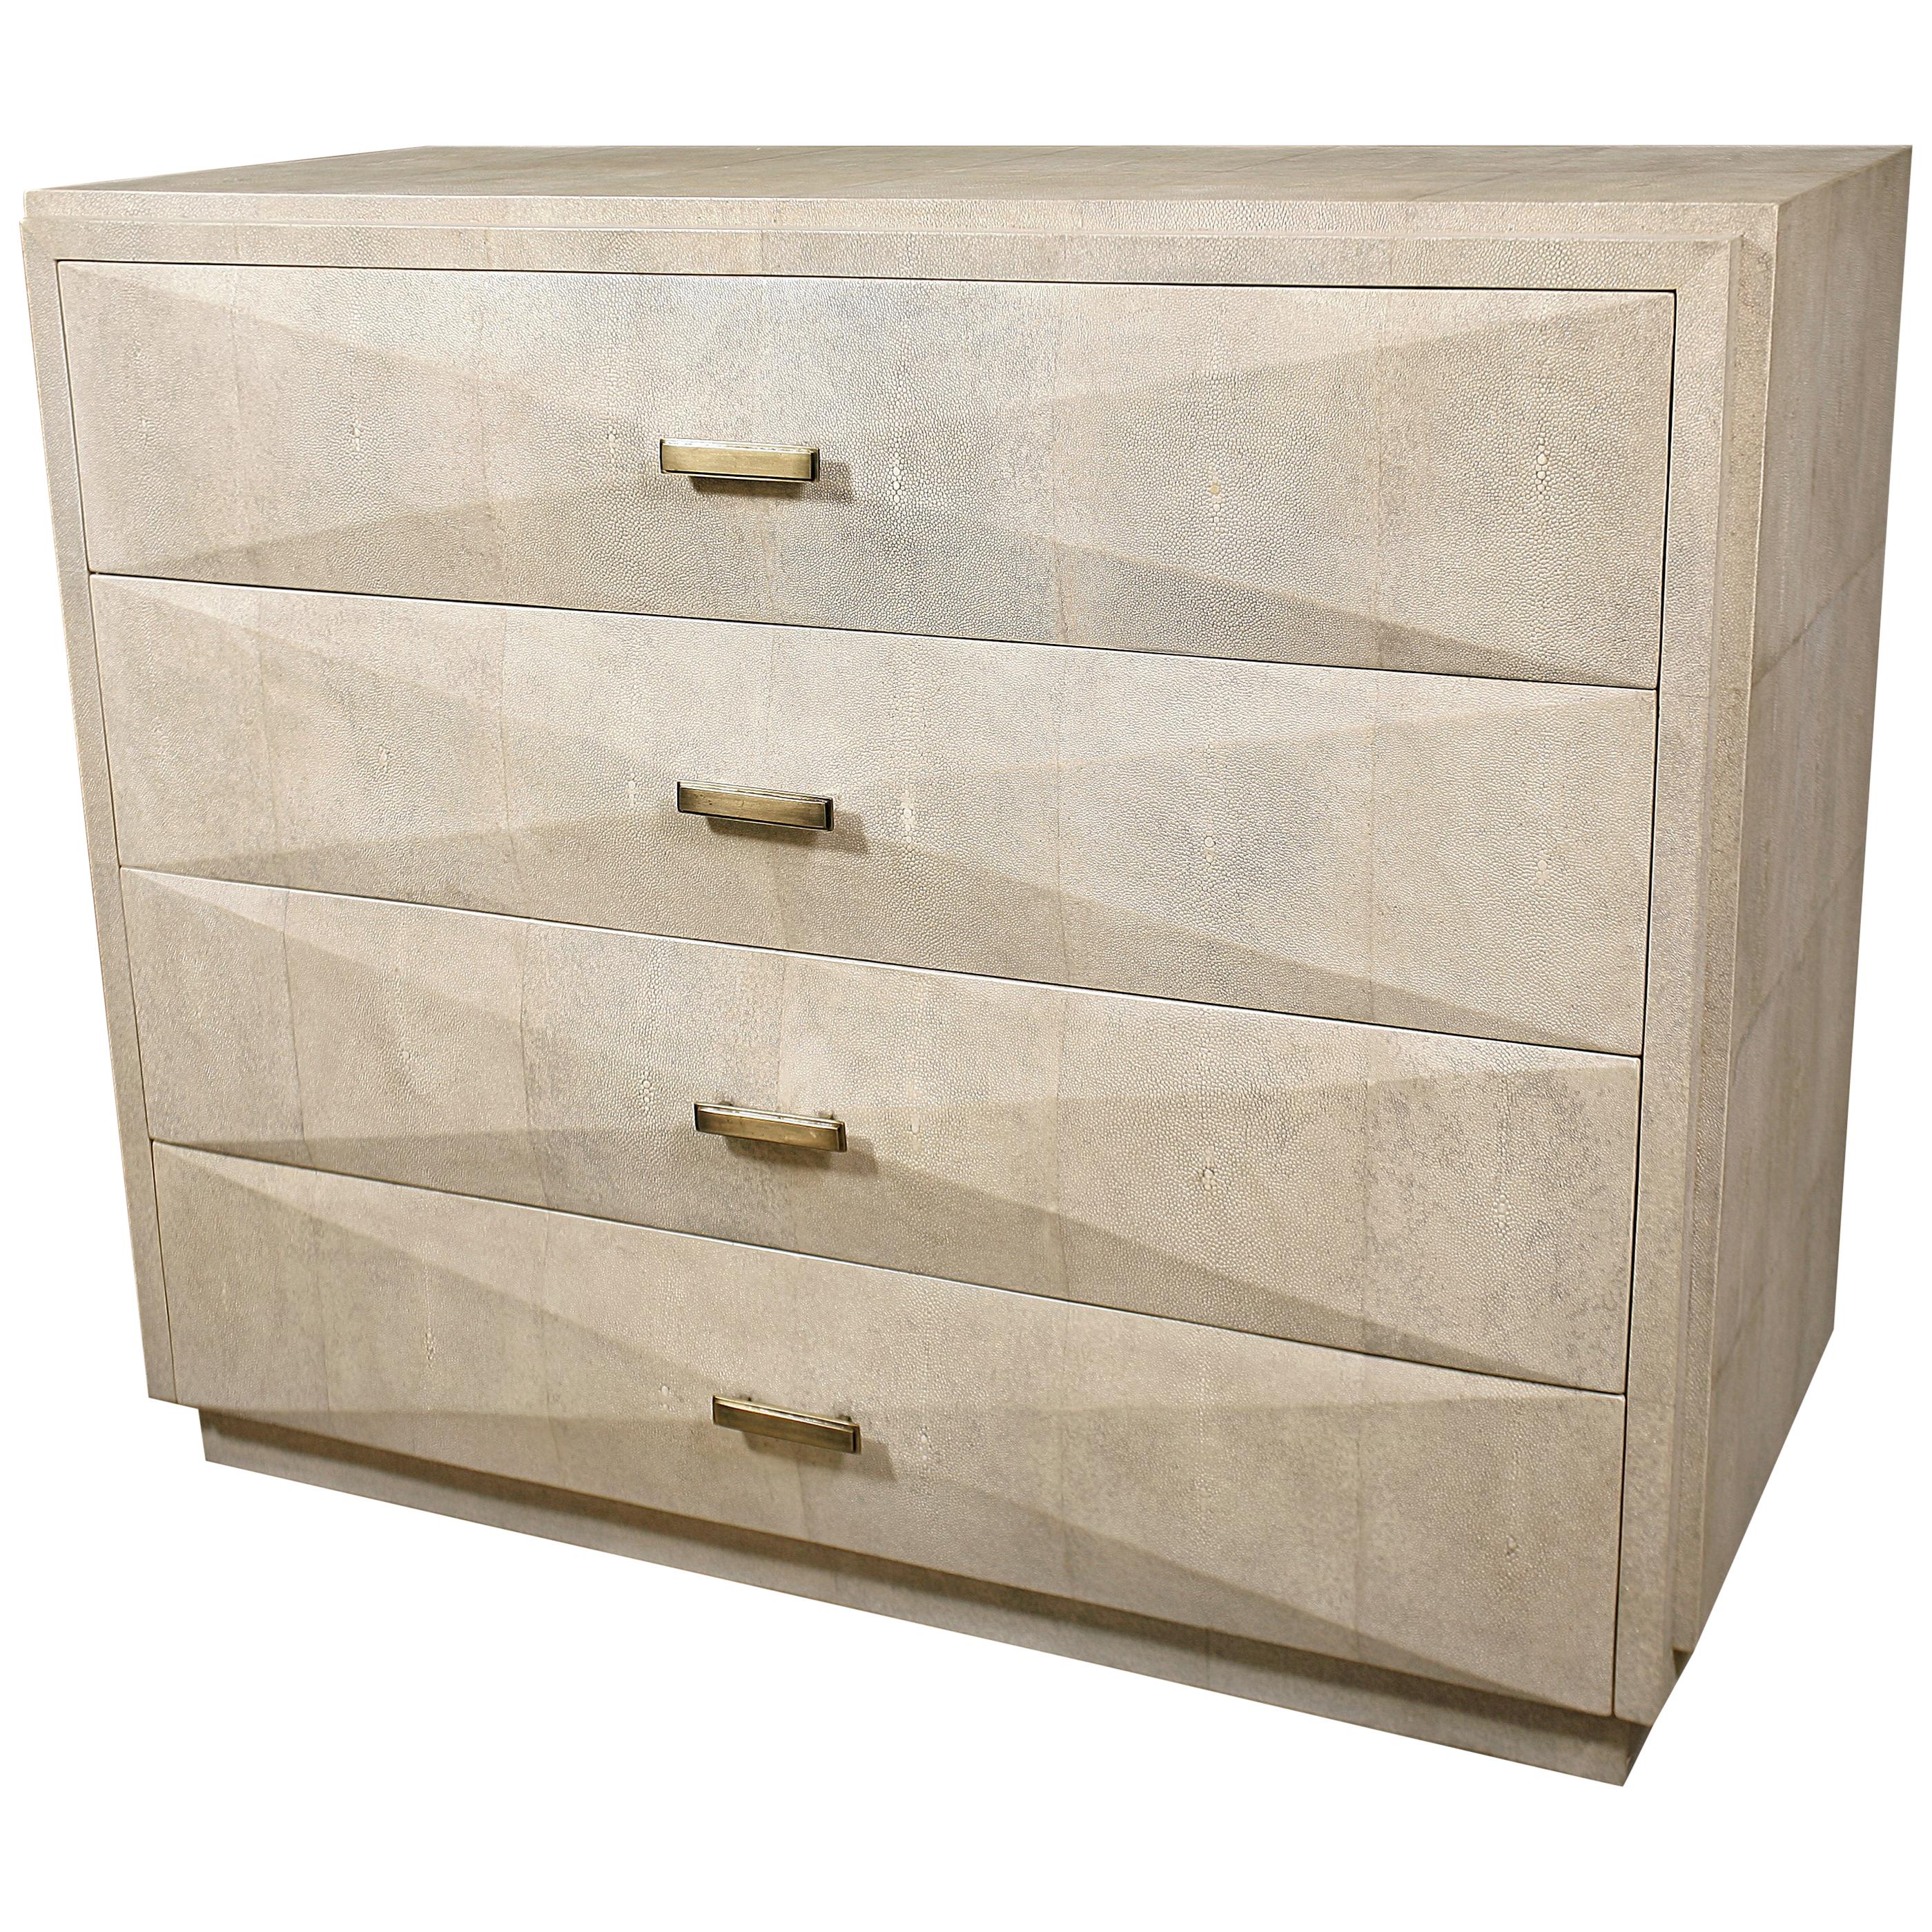 The iconic chest of drawers by R&Y Augousti is one of their first designs. A Classic and functional storage piece, with subtle geometry on the beveled drawers. This chest of drawers is completely inlaid in cream parchment with discreet bronze-patina